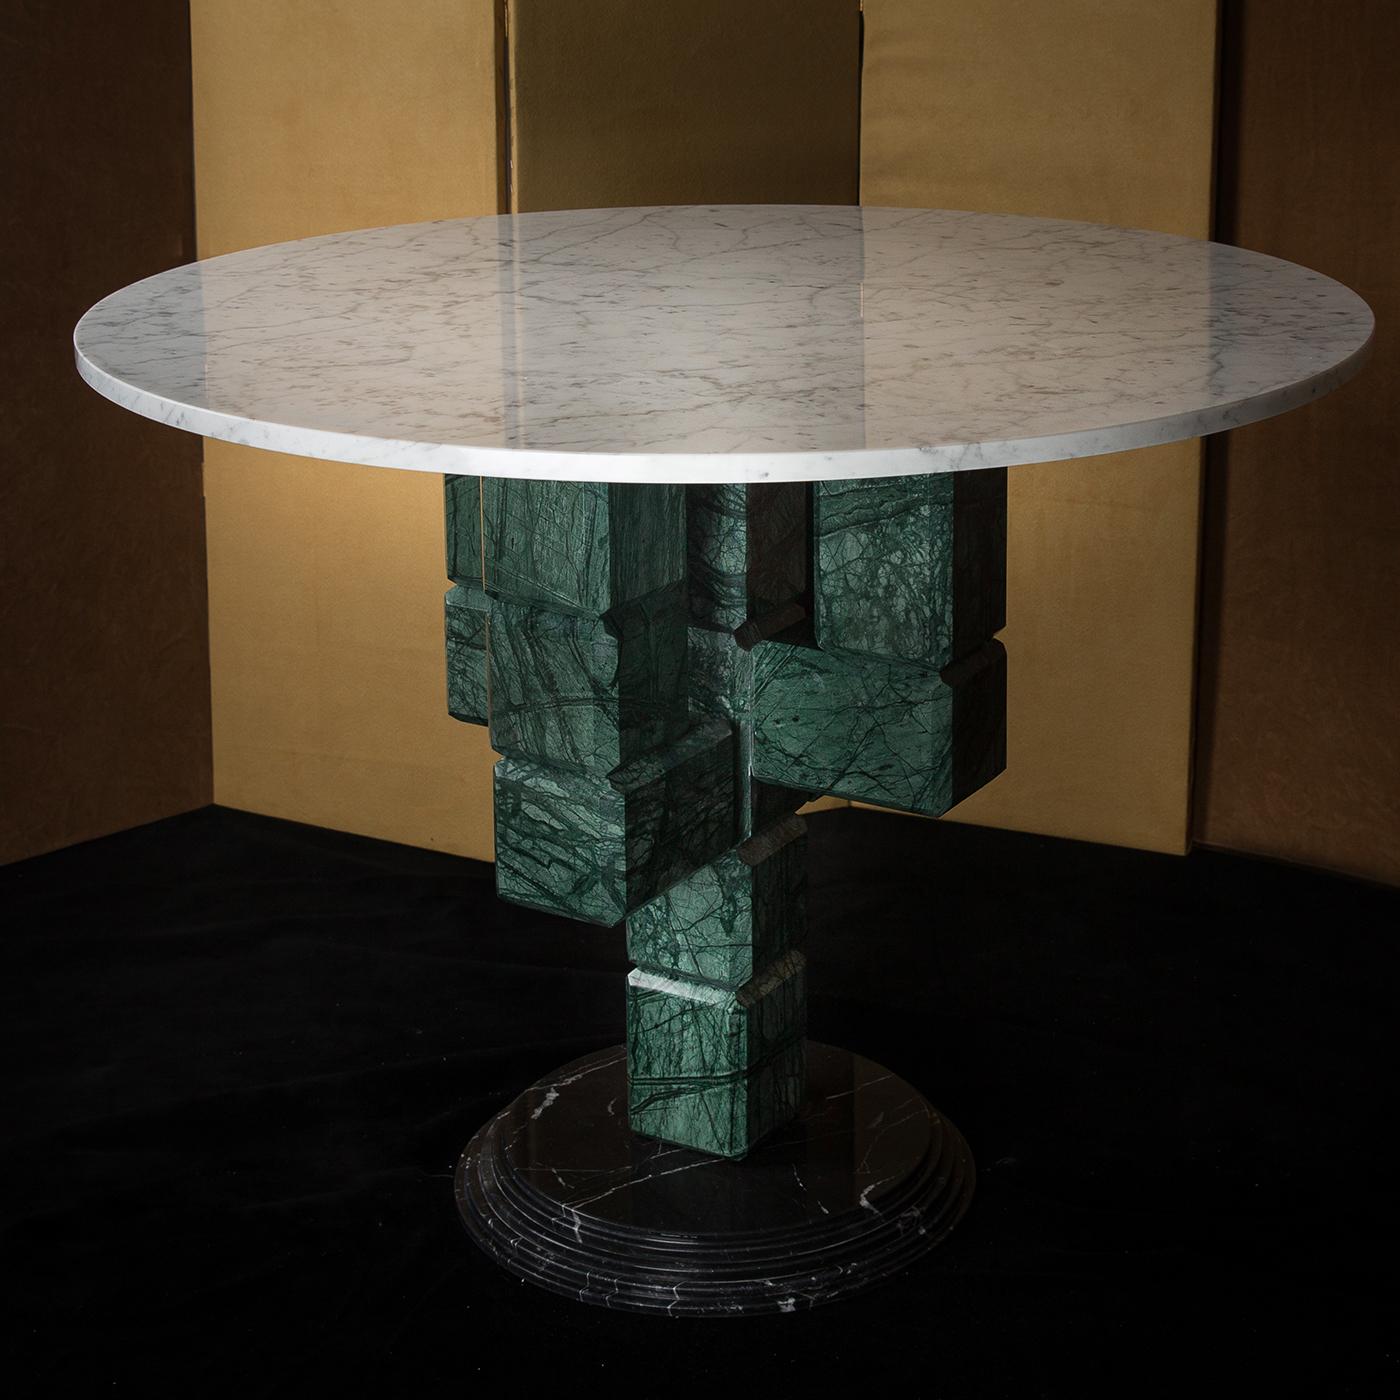 A stunning object of functional decor, this elegant dining table combines the traditional strength of marble with a modular structure that shows outstanding lightness. A superb addition to a modern dining room or large entryway, the white marble top